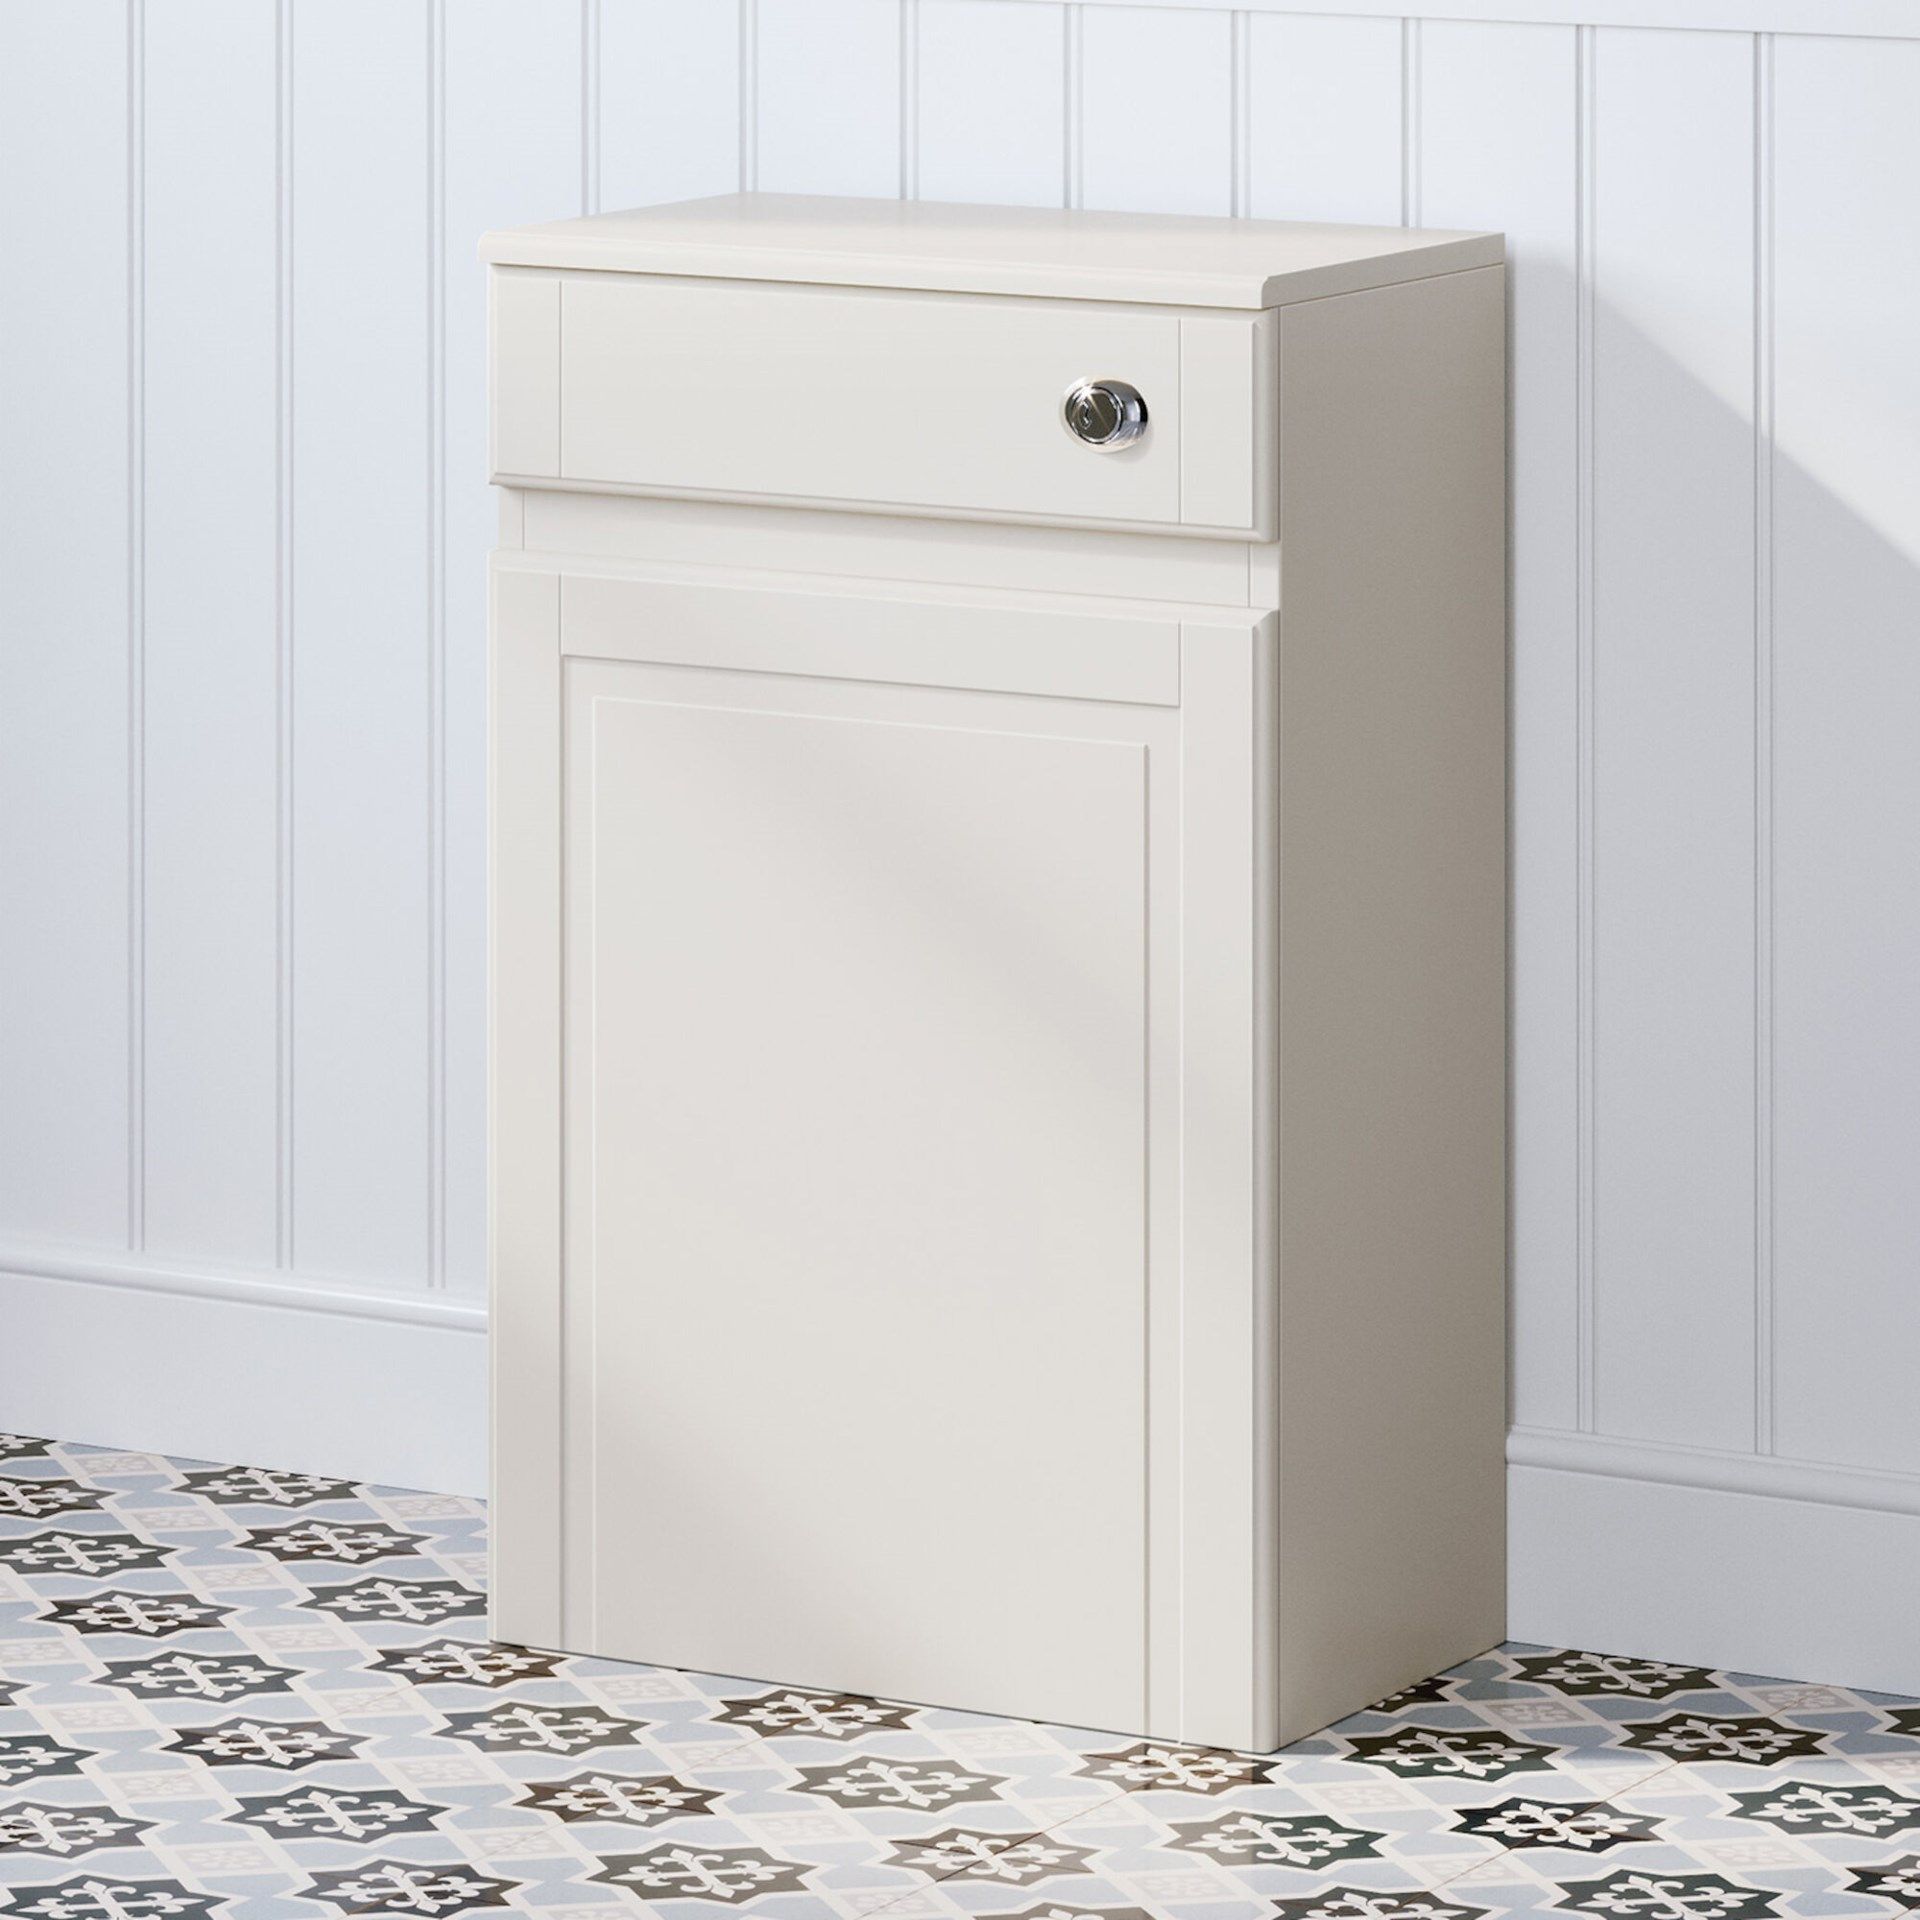 (XL68) 500mm Cambridge Clotted Cream Back to Wall Toilet Unit.RRP £209.99.Our discreet unit cl...